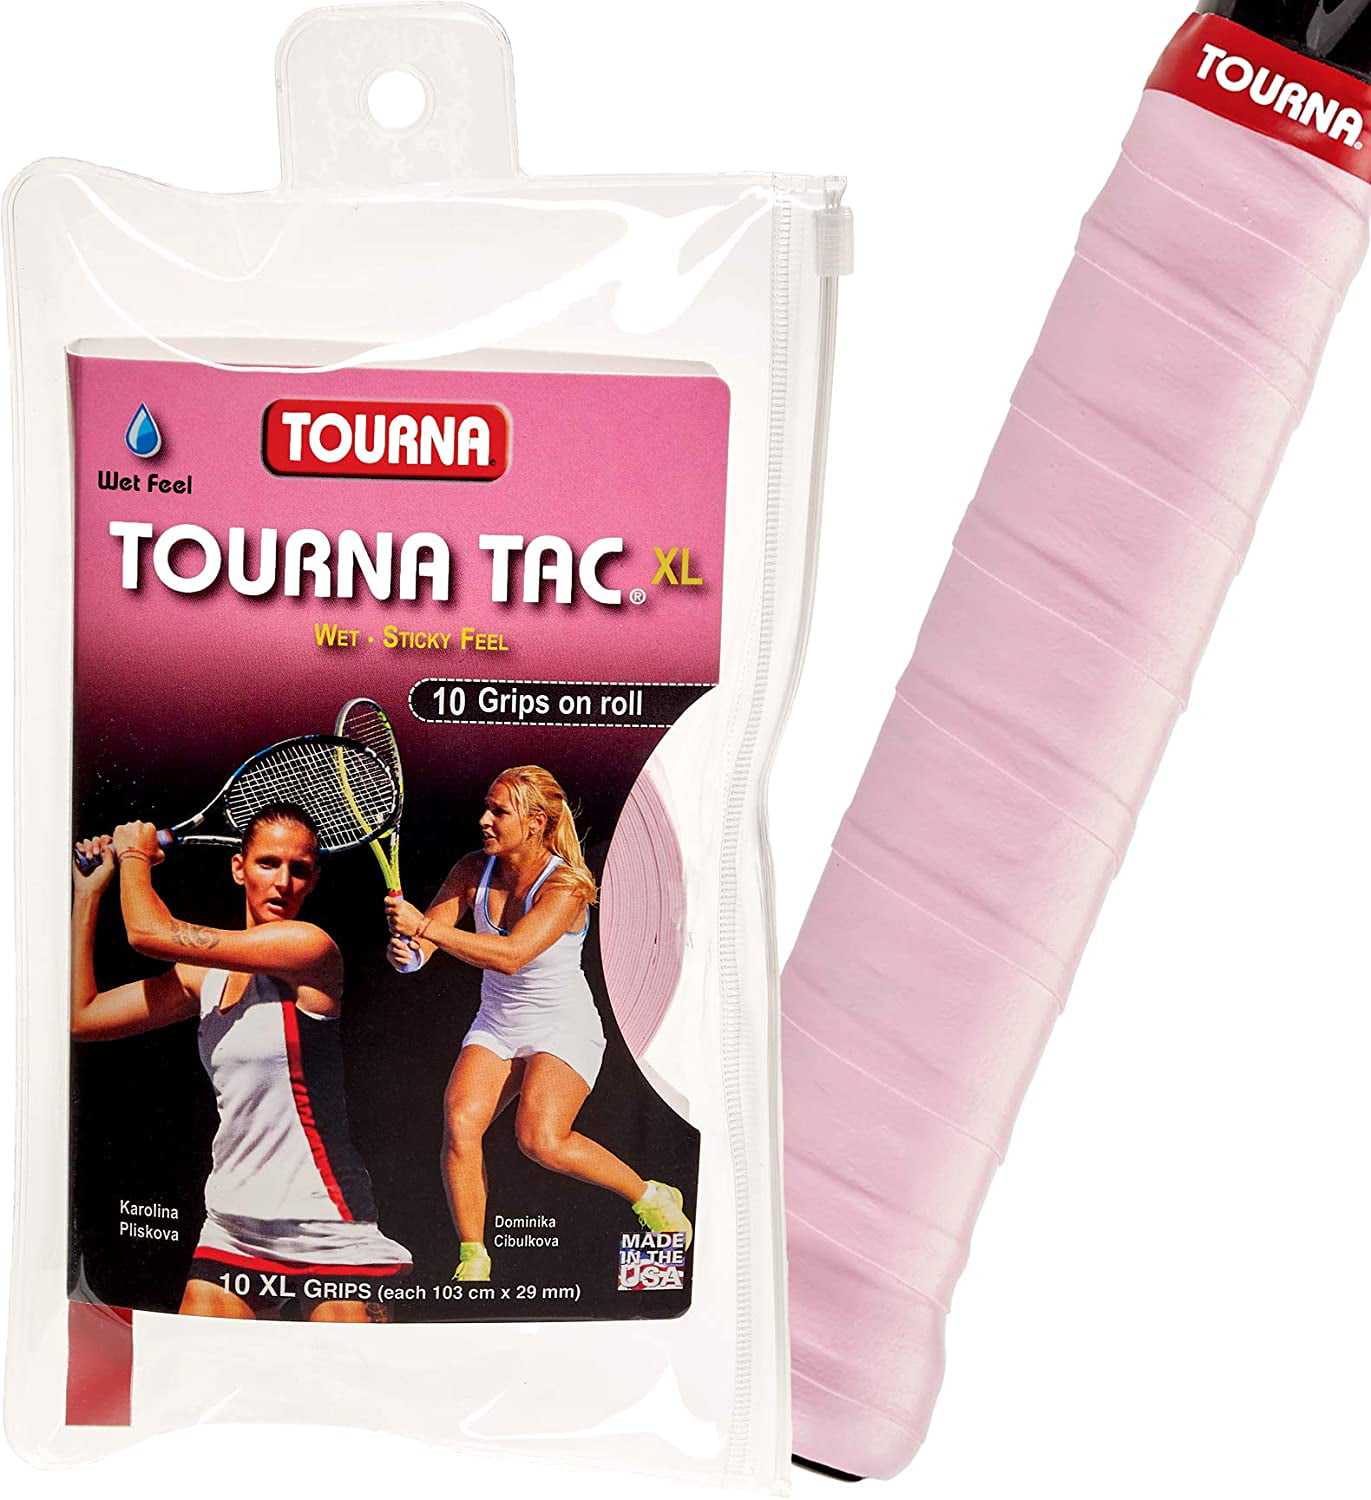 Tourna Tac XL10 Grips on RollWet Sticky Feel 